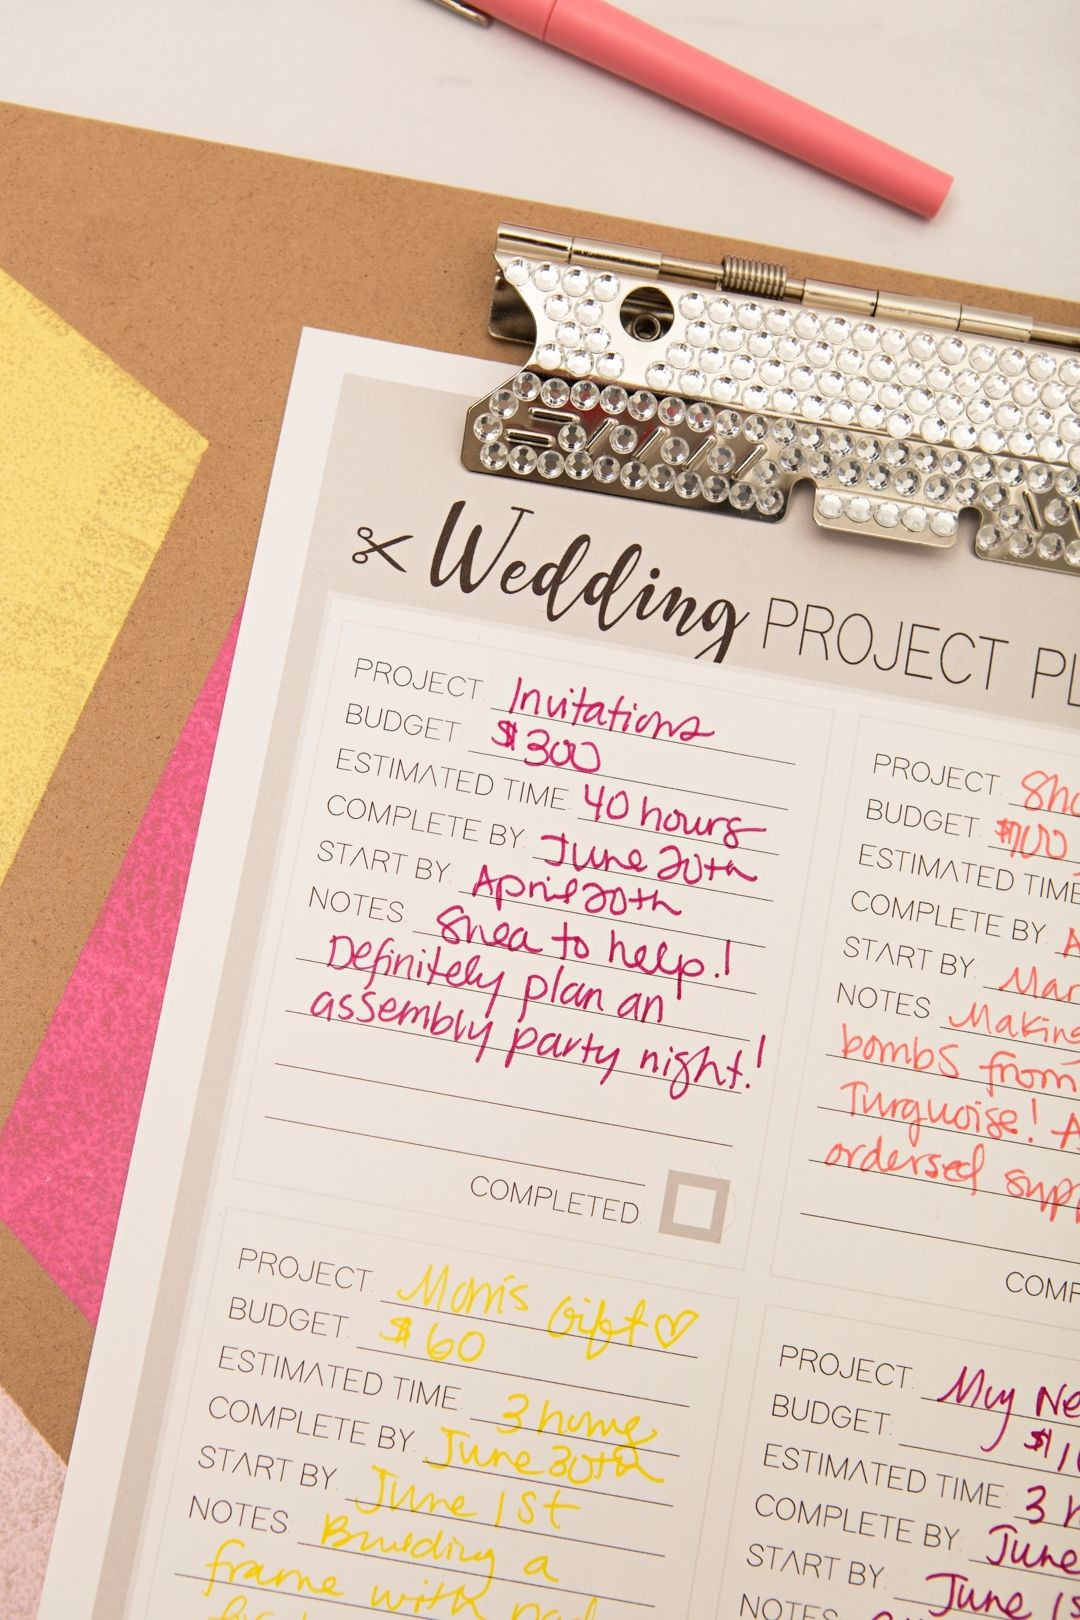 Wedding Planning Binder DIY
 Print Out Out This DIY "Wedding Project Planner Sheet" For